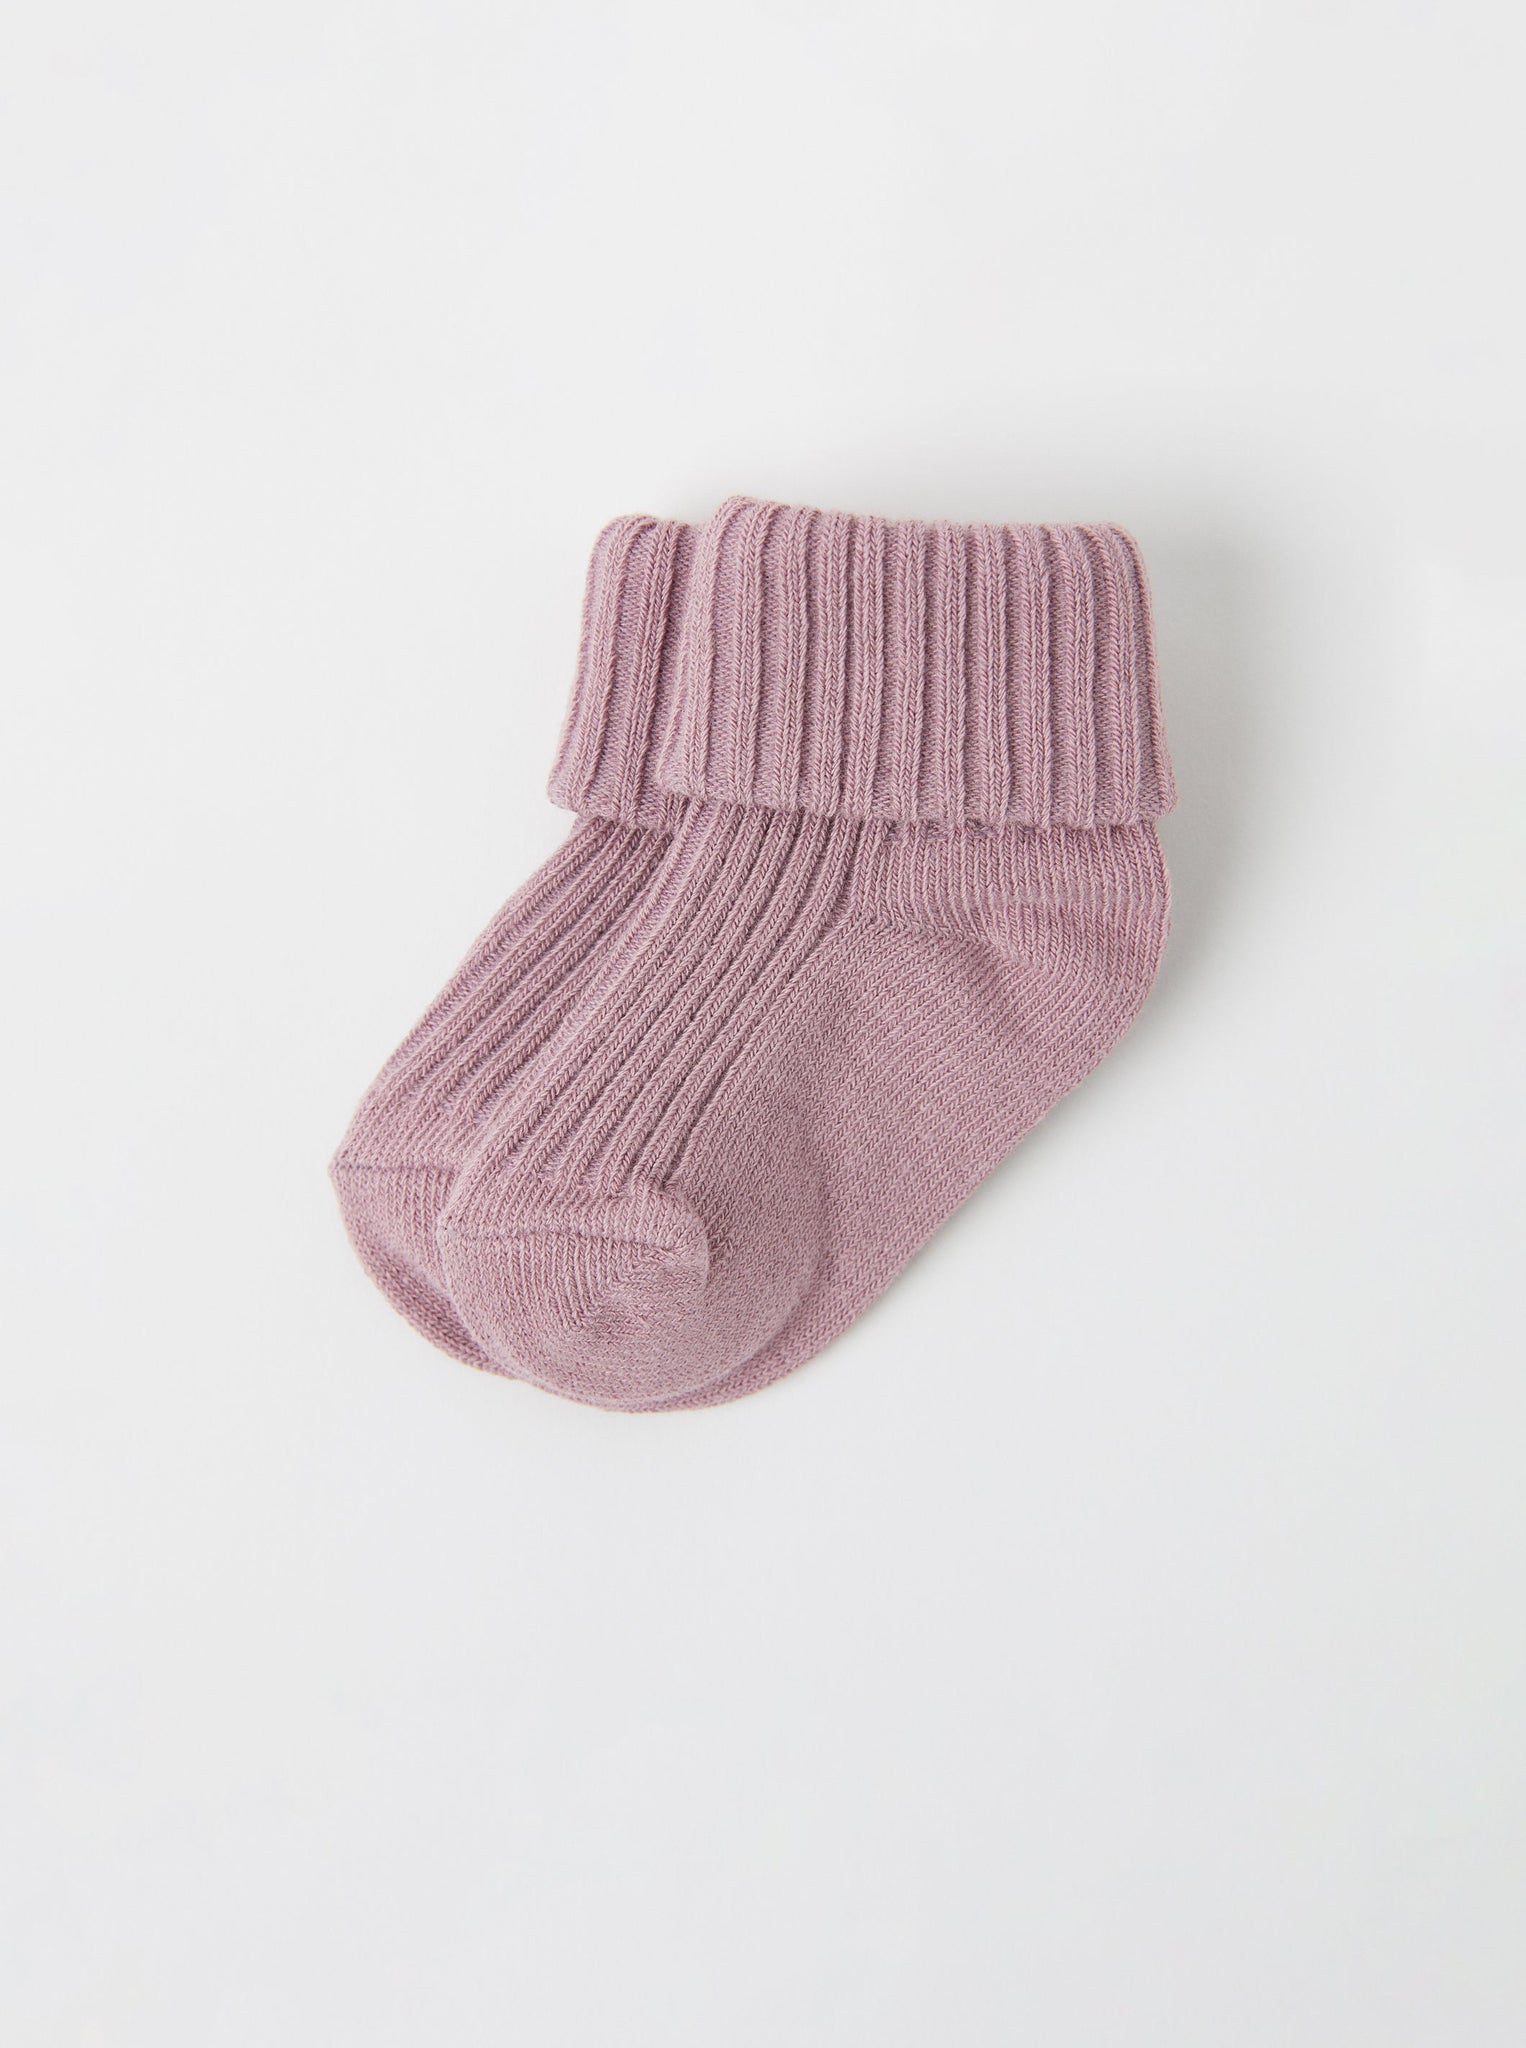 Organic Cotton Pink Baby Socks from the Polarn O. Pyret babywear collection. The best ethical kids clothes